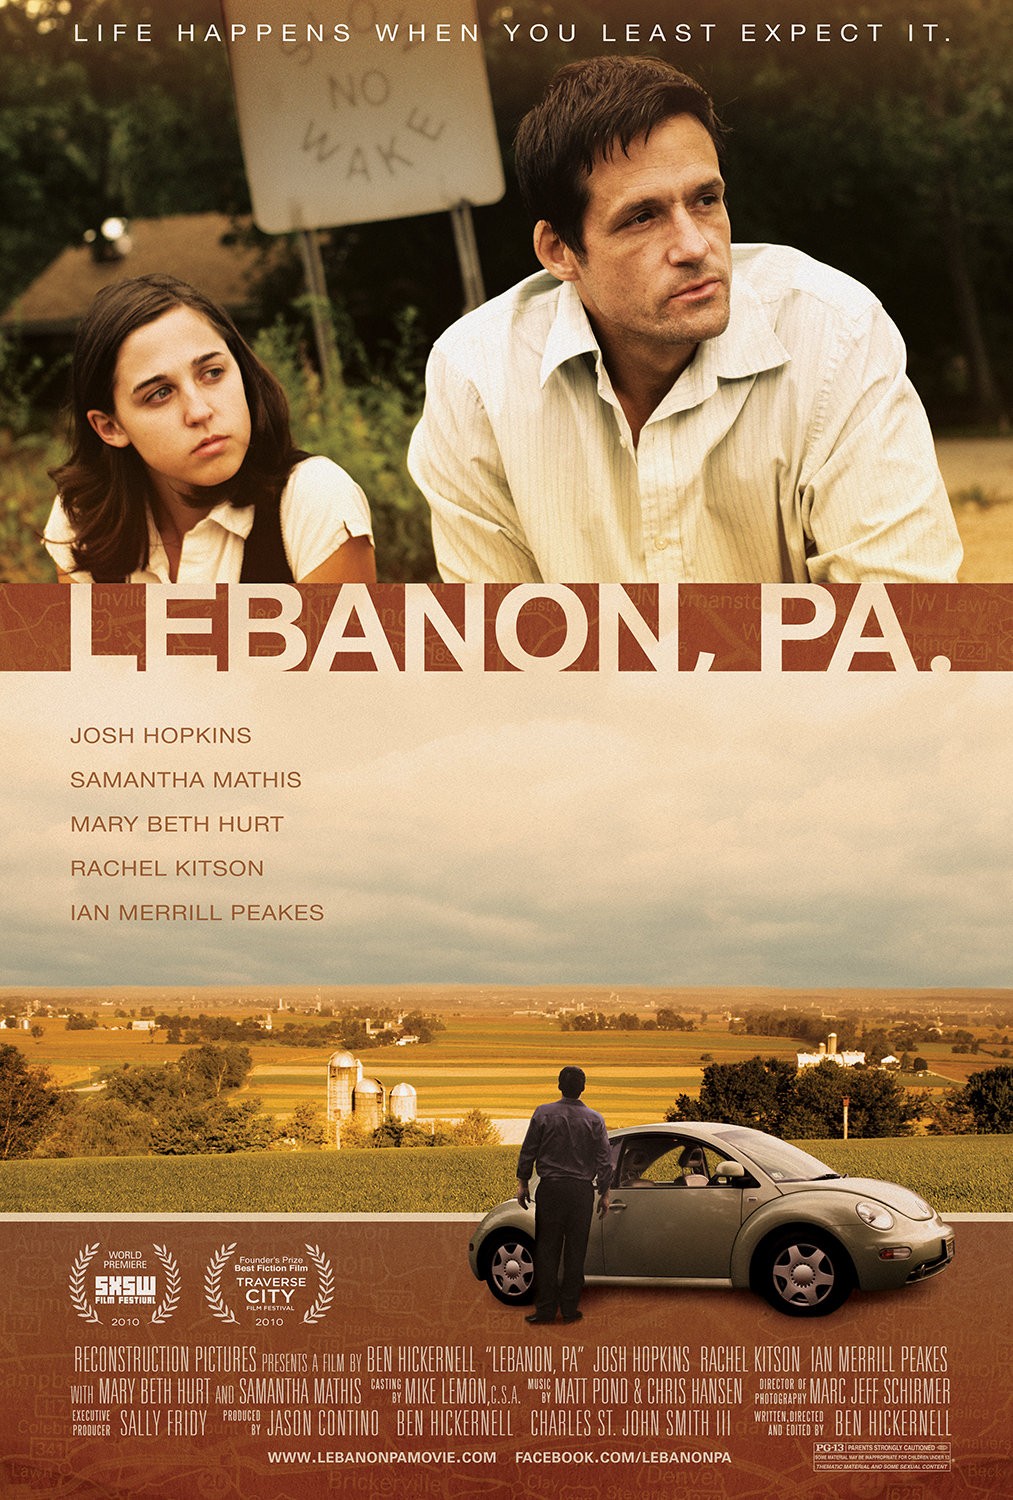 Extra Large Movie Poster Image for Lebanon, Pa. (#2 of 2)